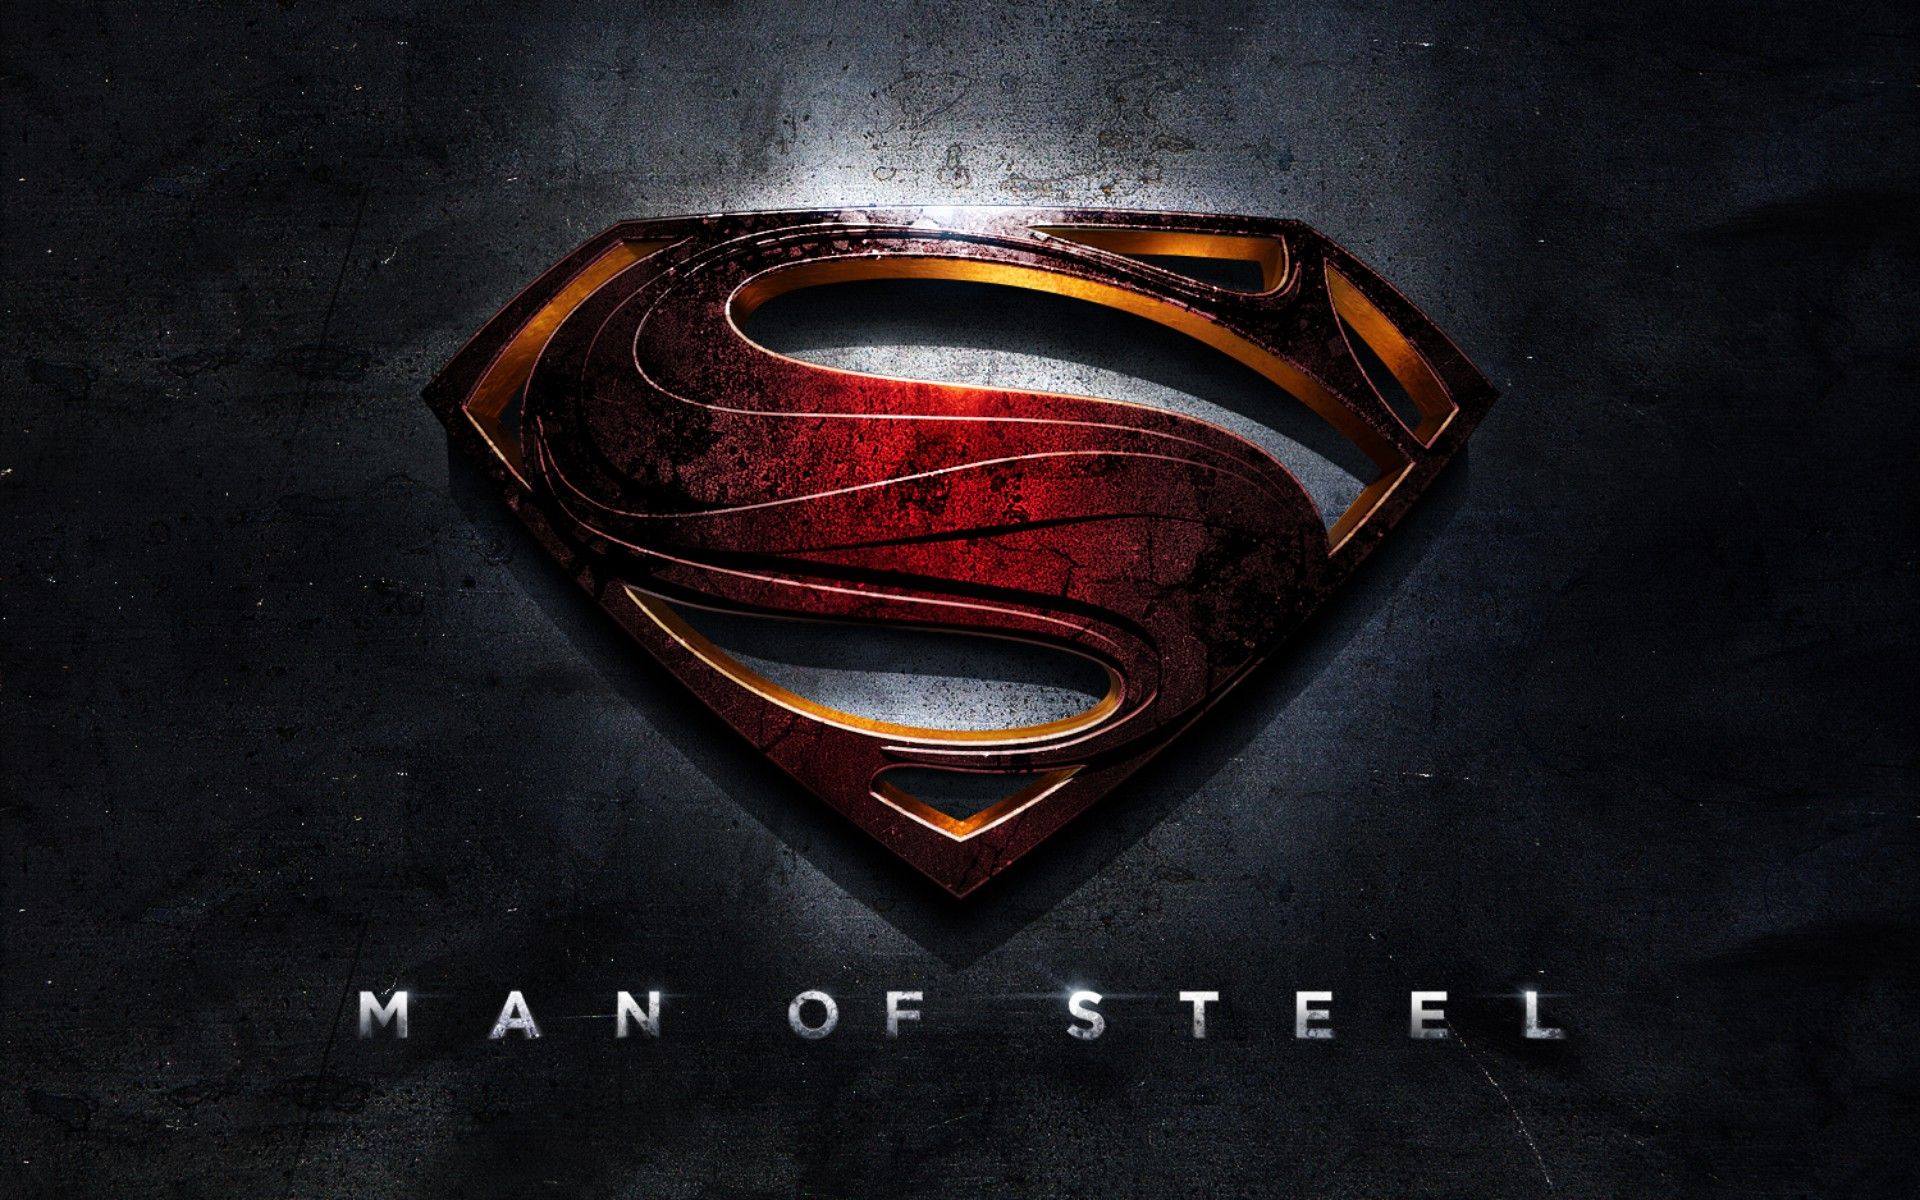 Join the FreeCharge team's Geeks and Freaks night on 14th June for Man of Steel; limited seats only